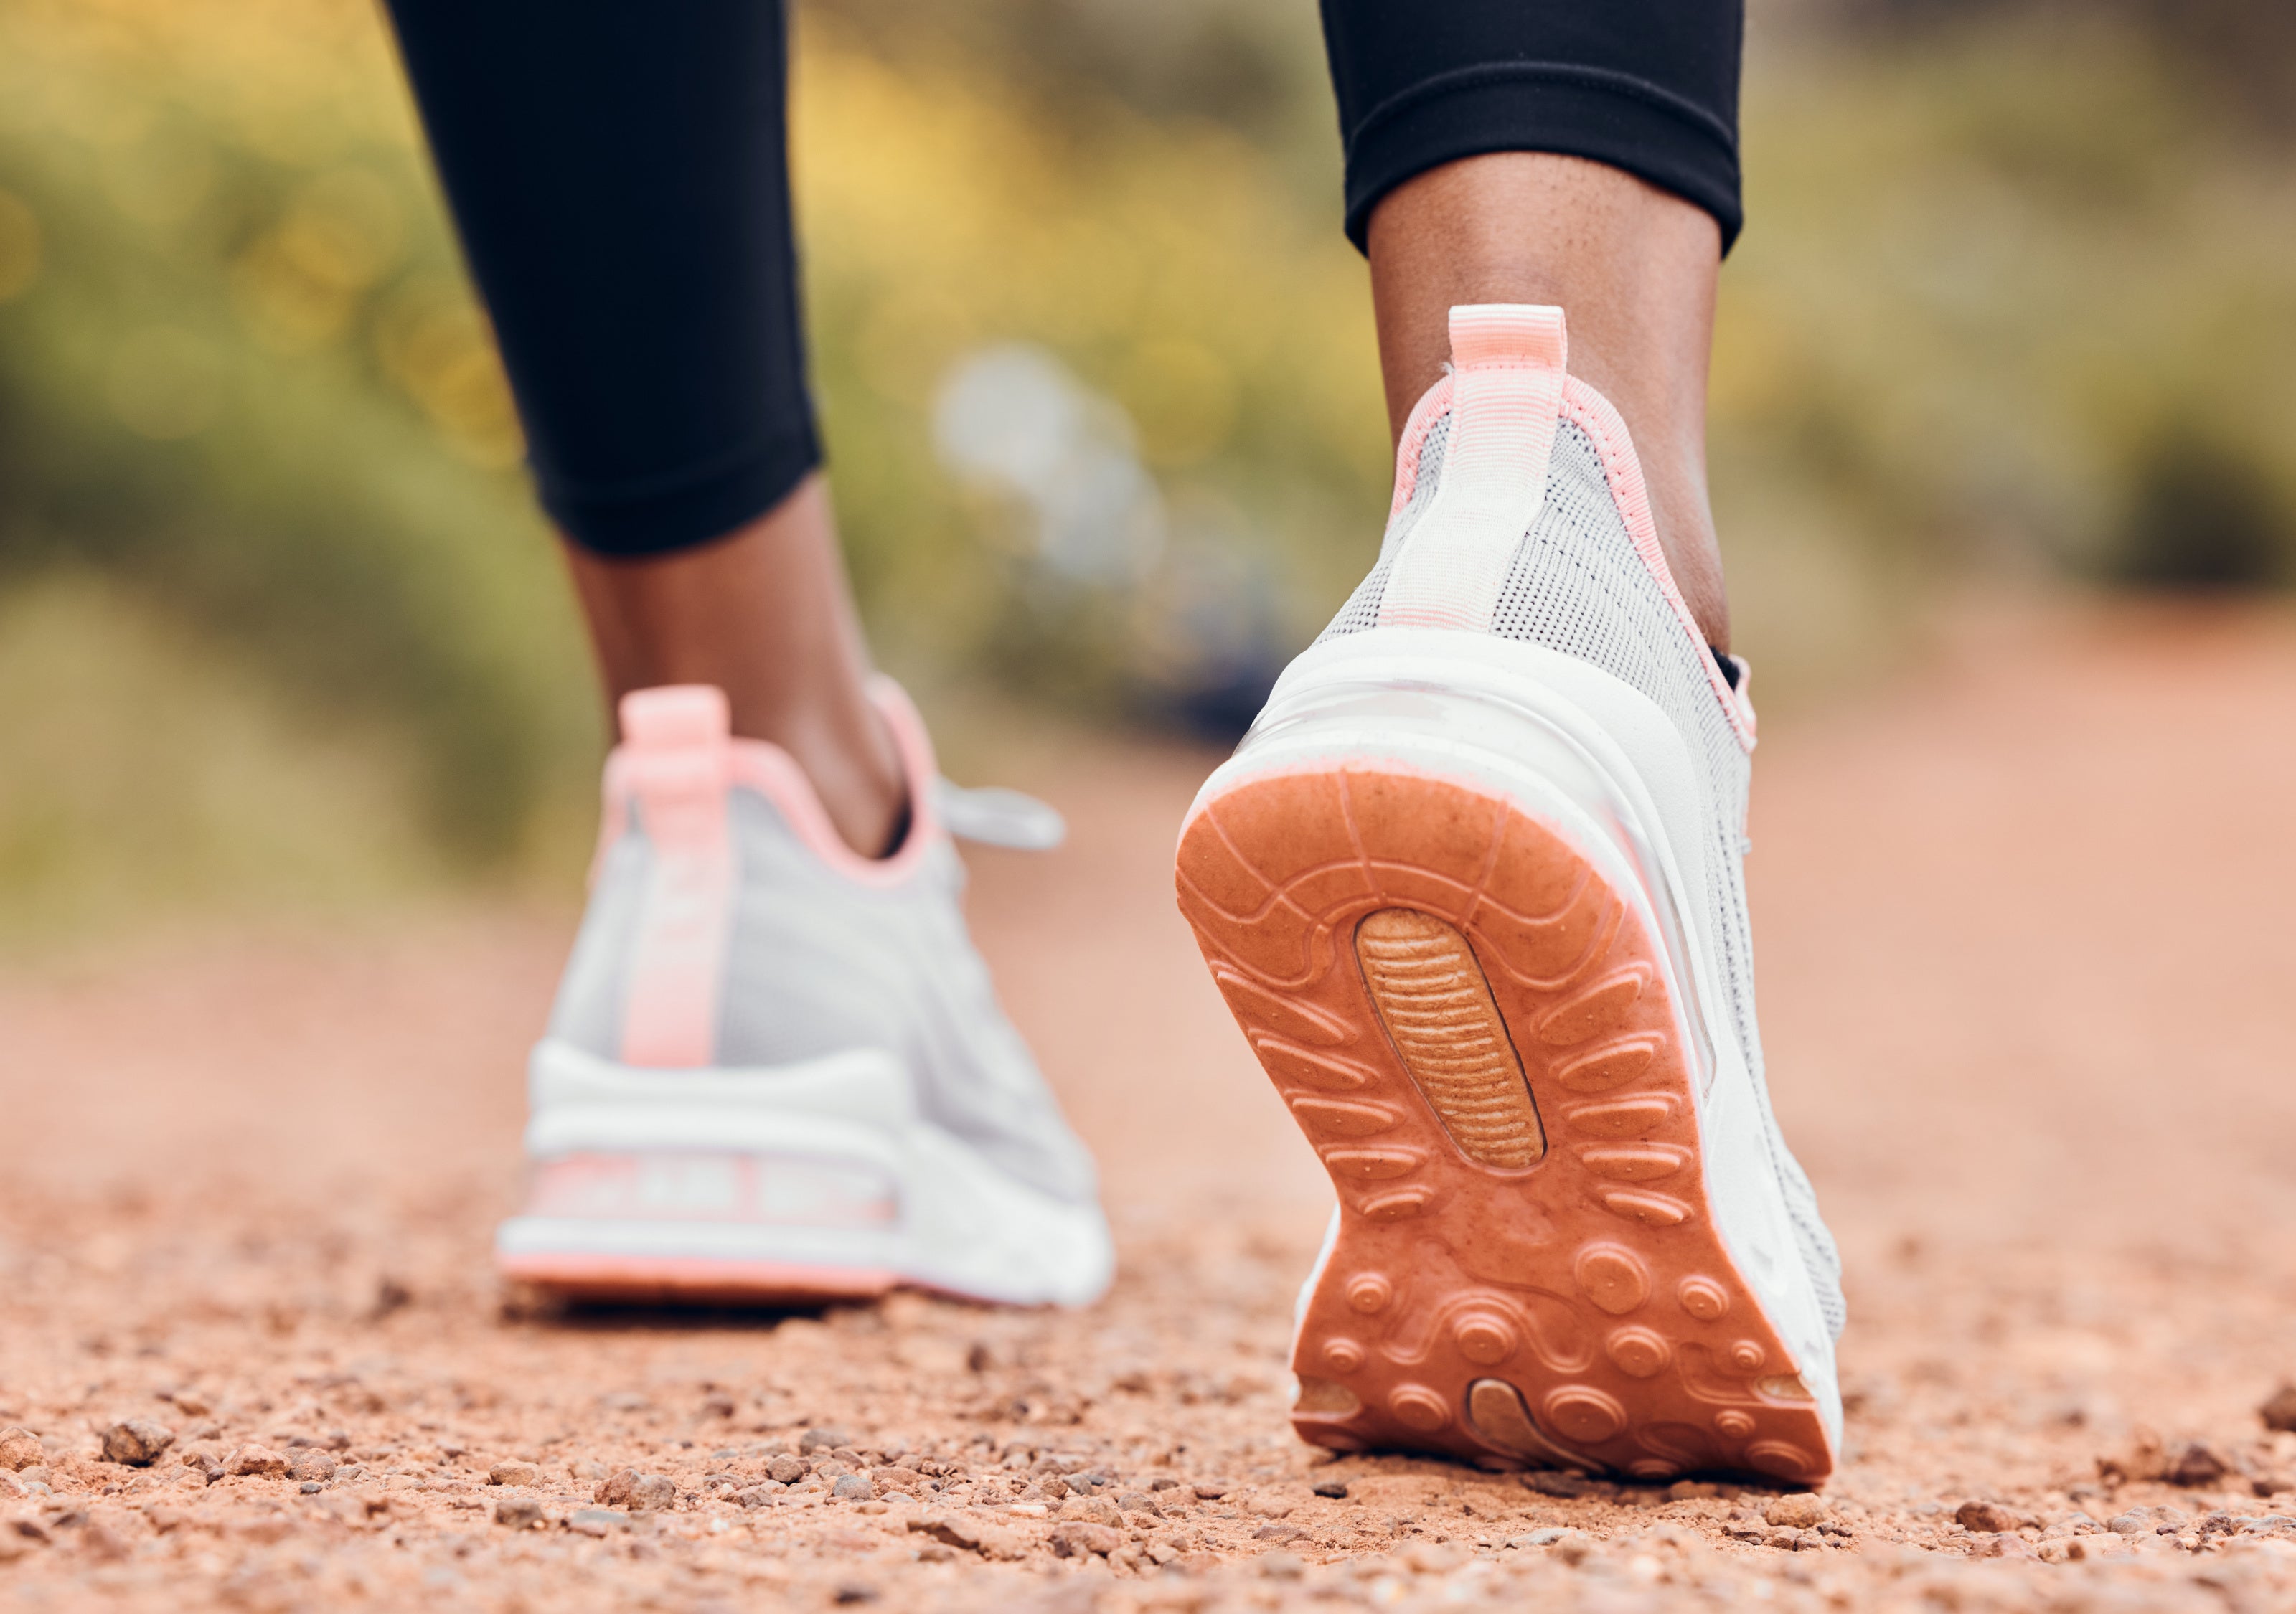 Why walking for about 30 minutes every day is good for you